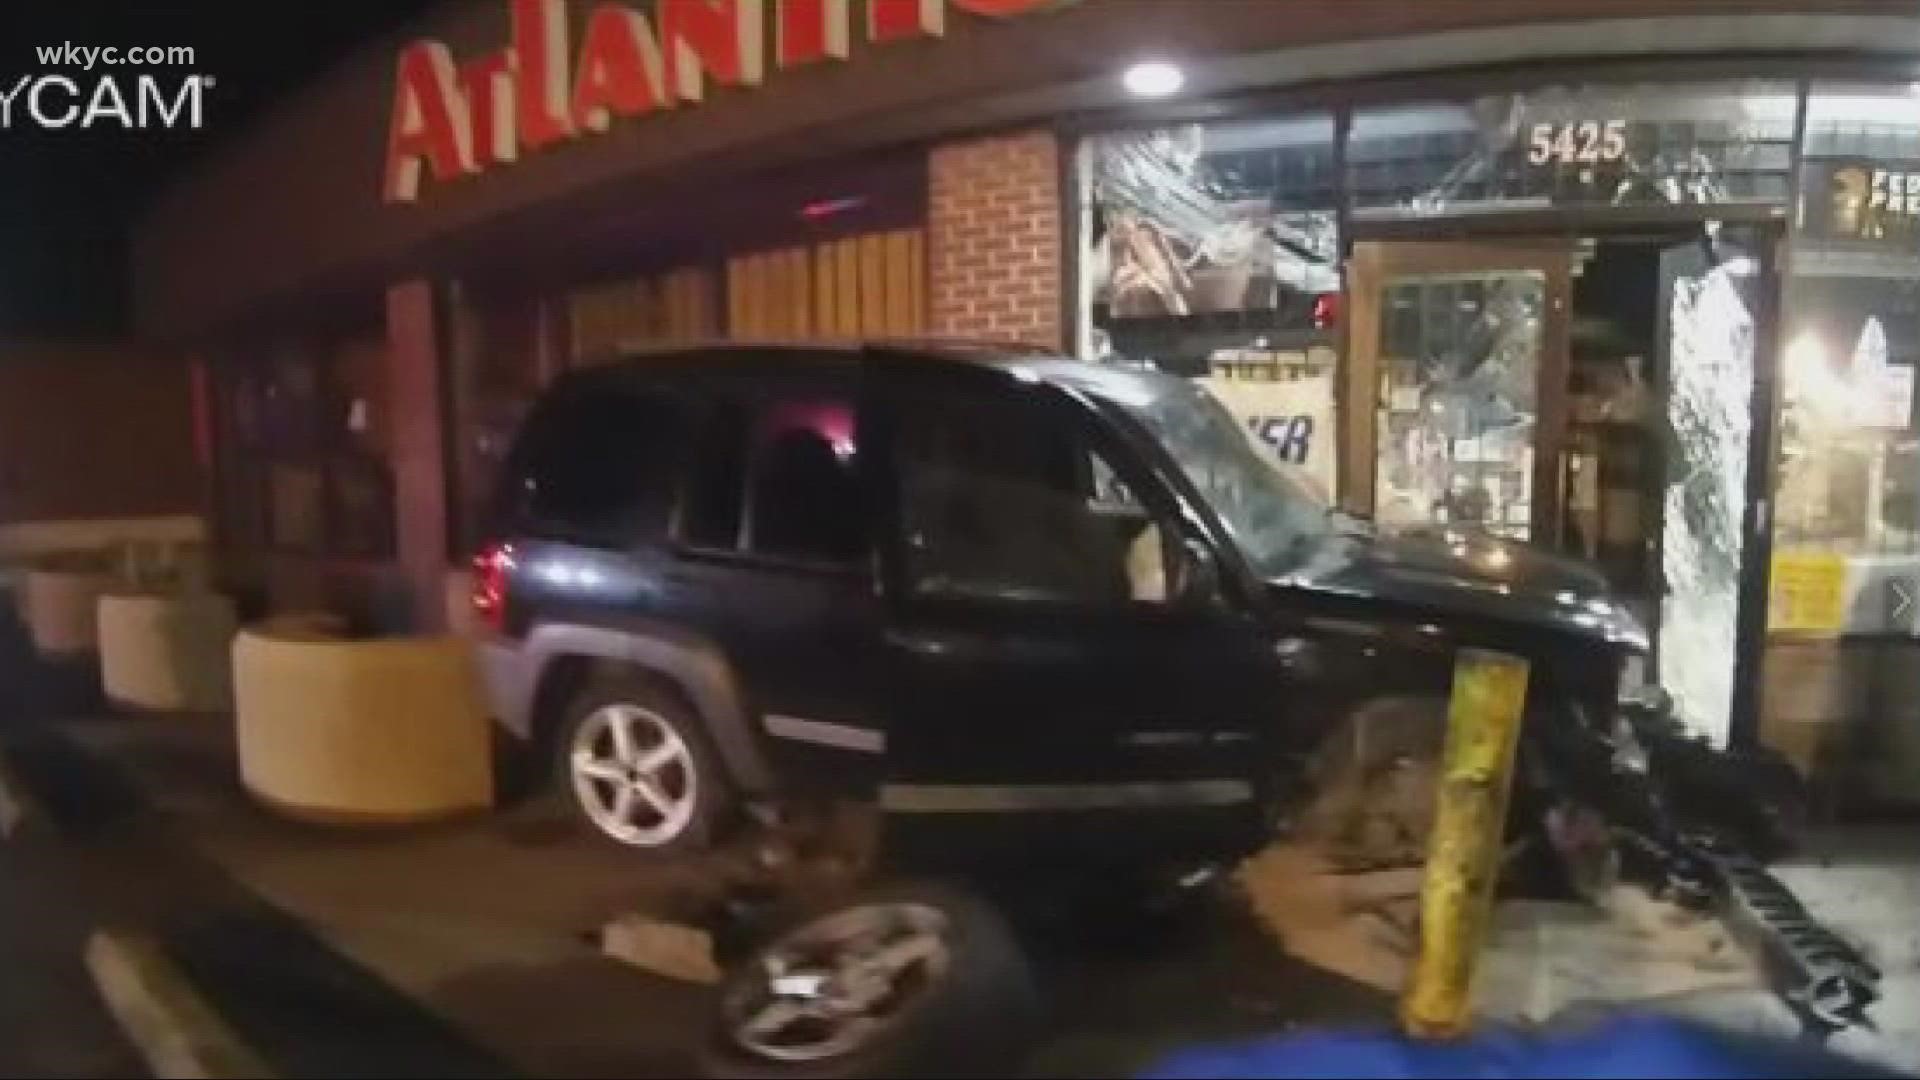 The suspects drove a car into Atlantic Gun and Tackle and stole the weapons. A $5,000 reward is being offered.